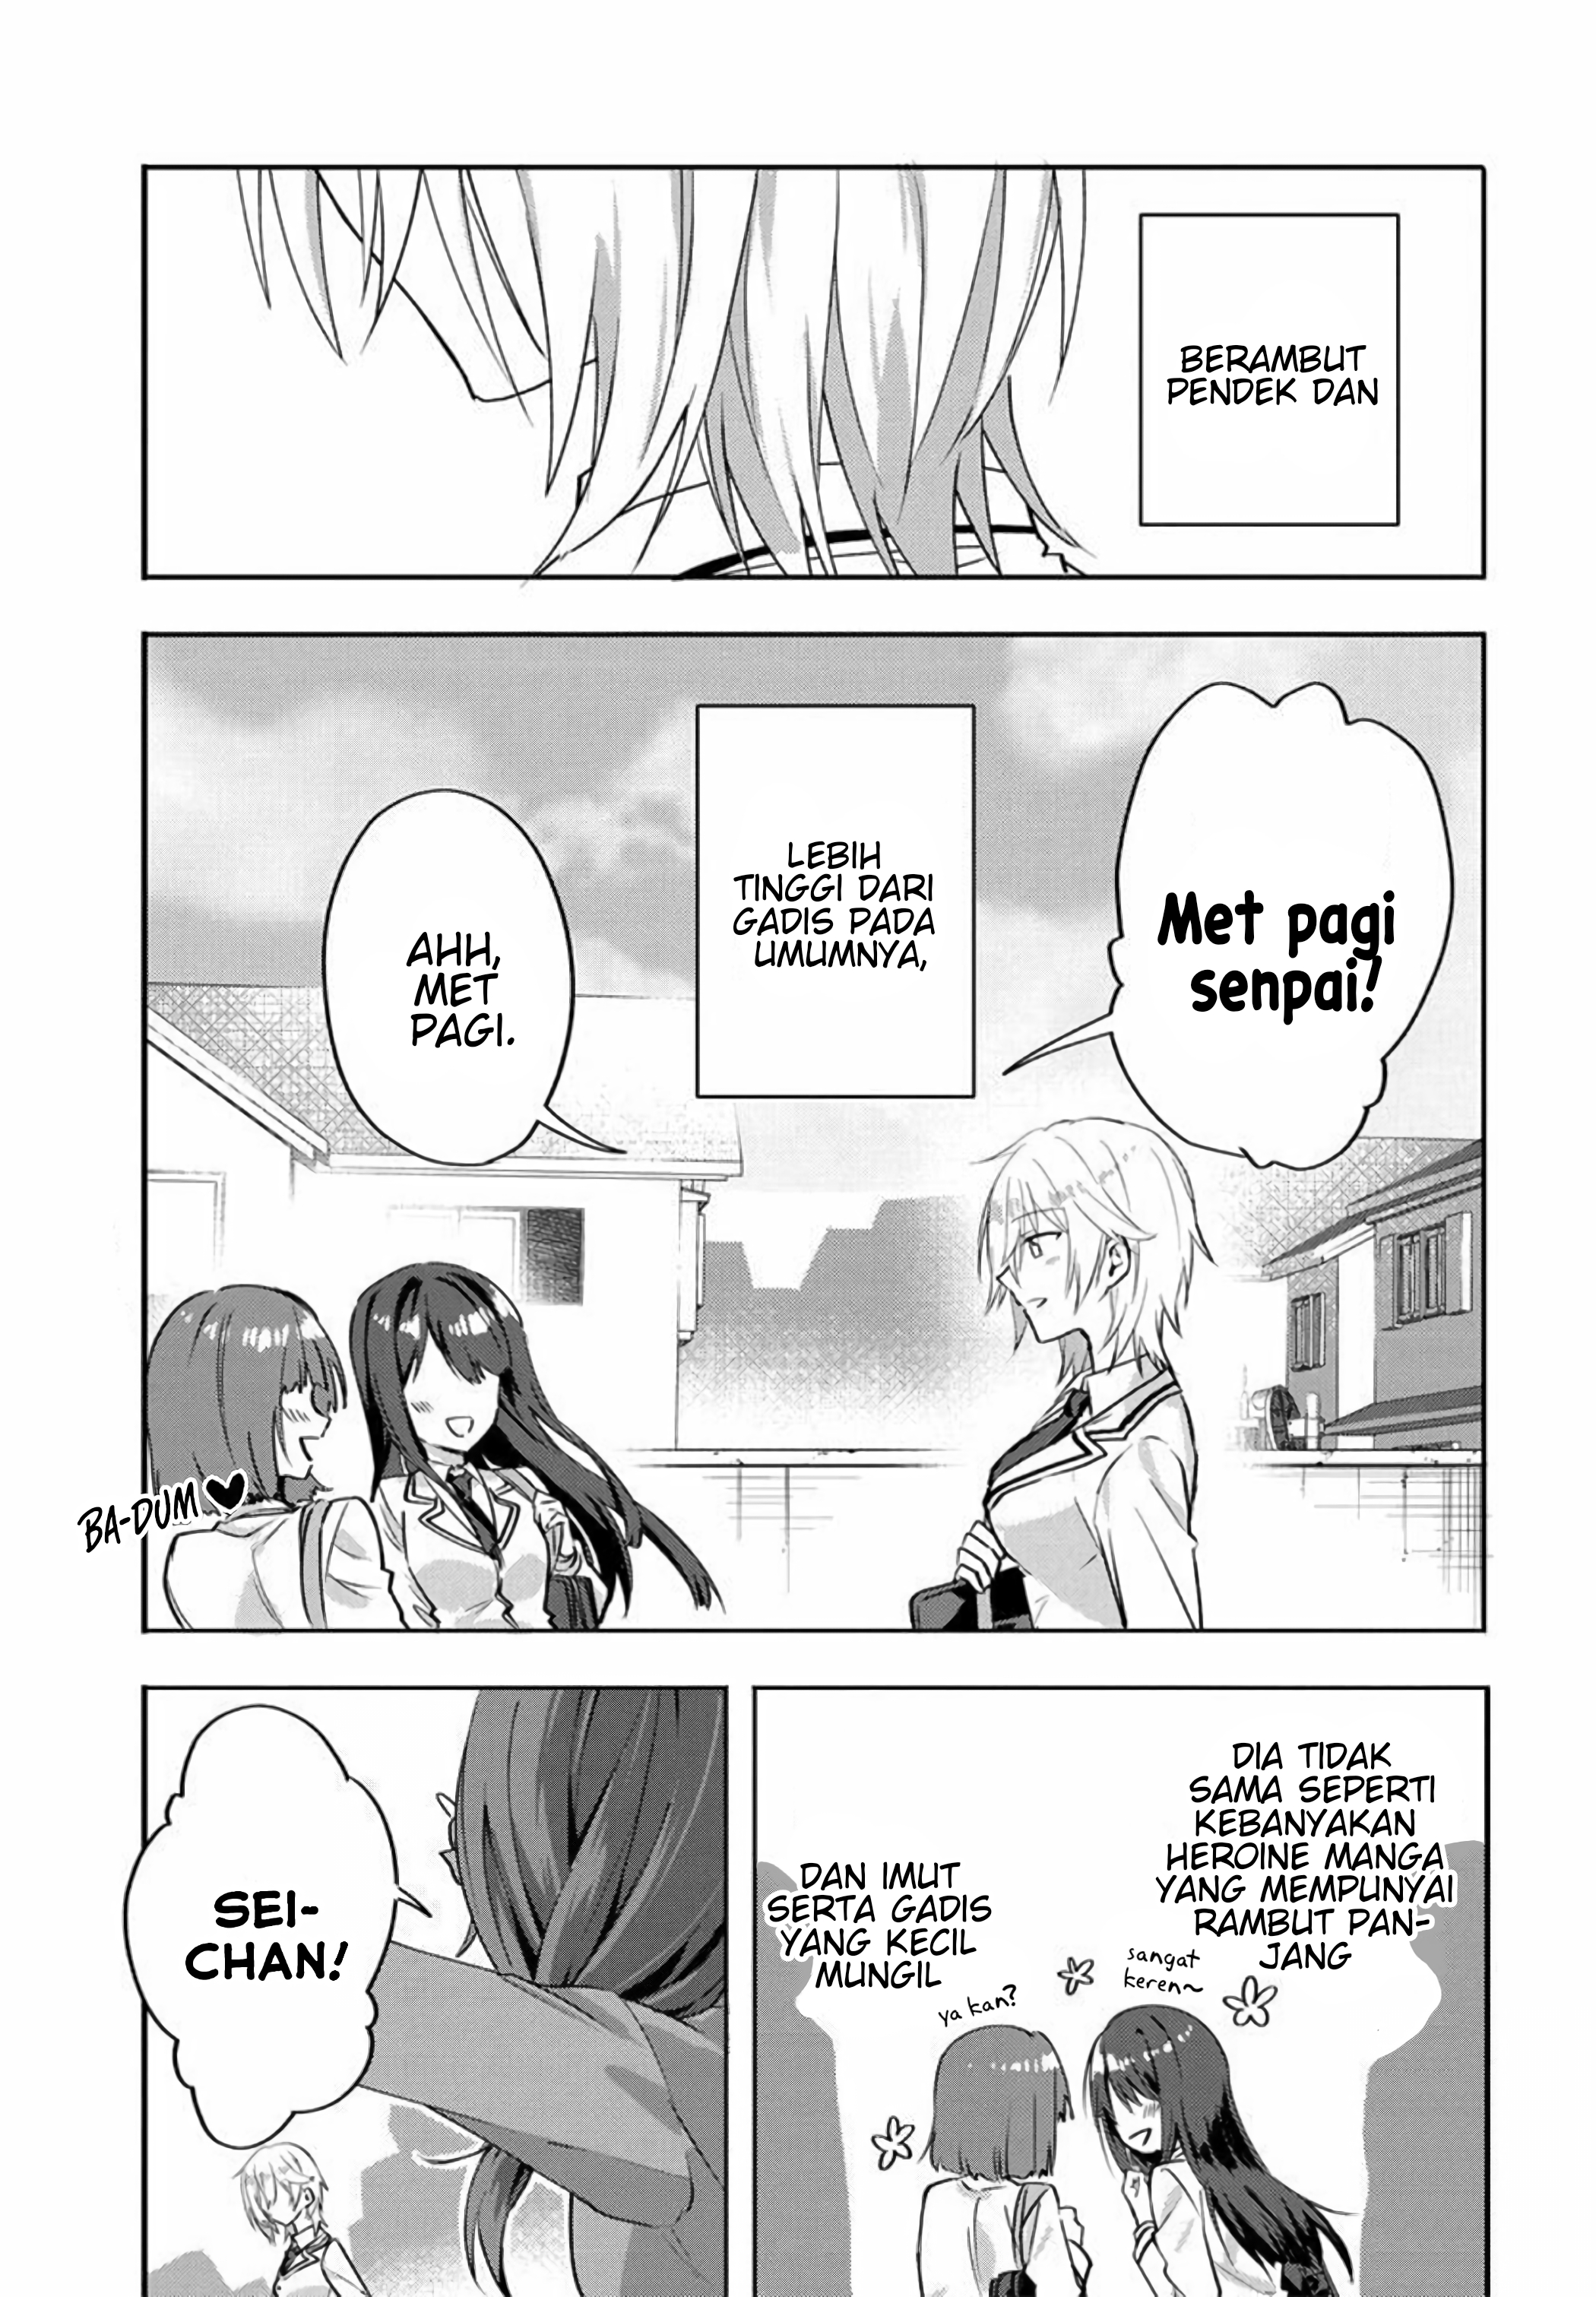 Since I'Ve Entered The World Of Romantic Comedy Manga, I'Ll Do My Best To Make The Losing Heroine Happy. Chapter 2.1 - 85